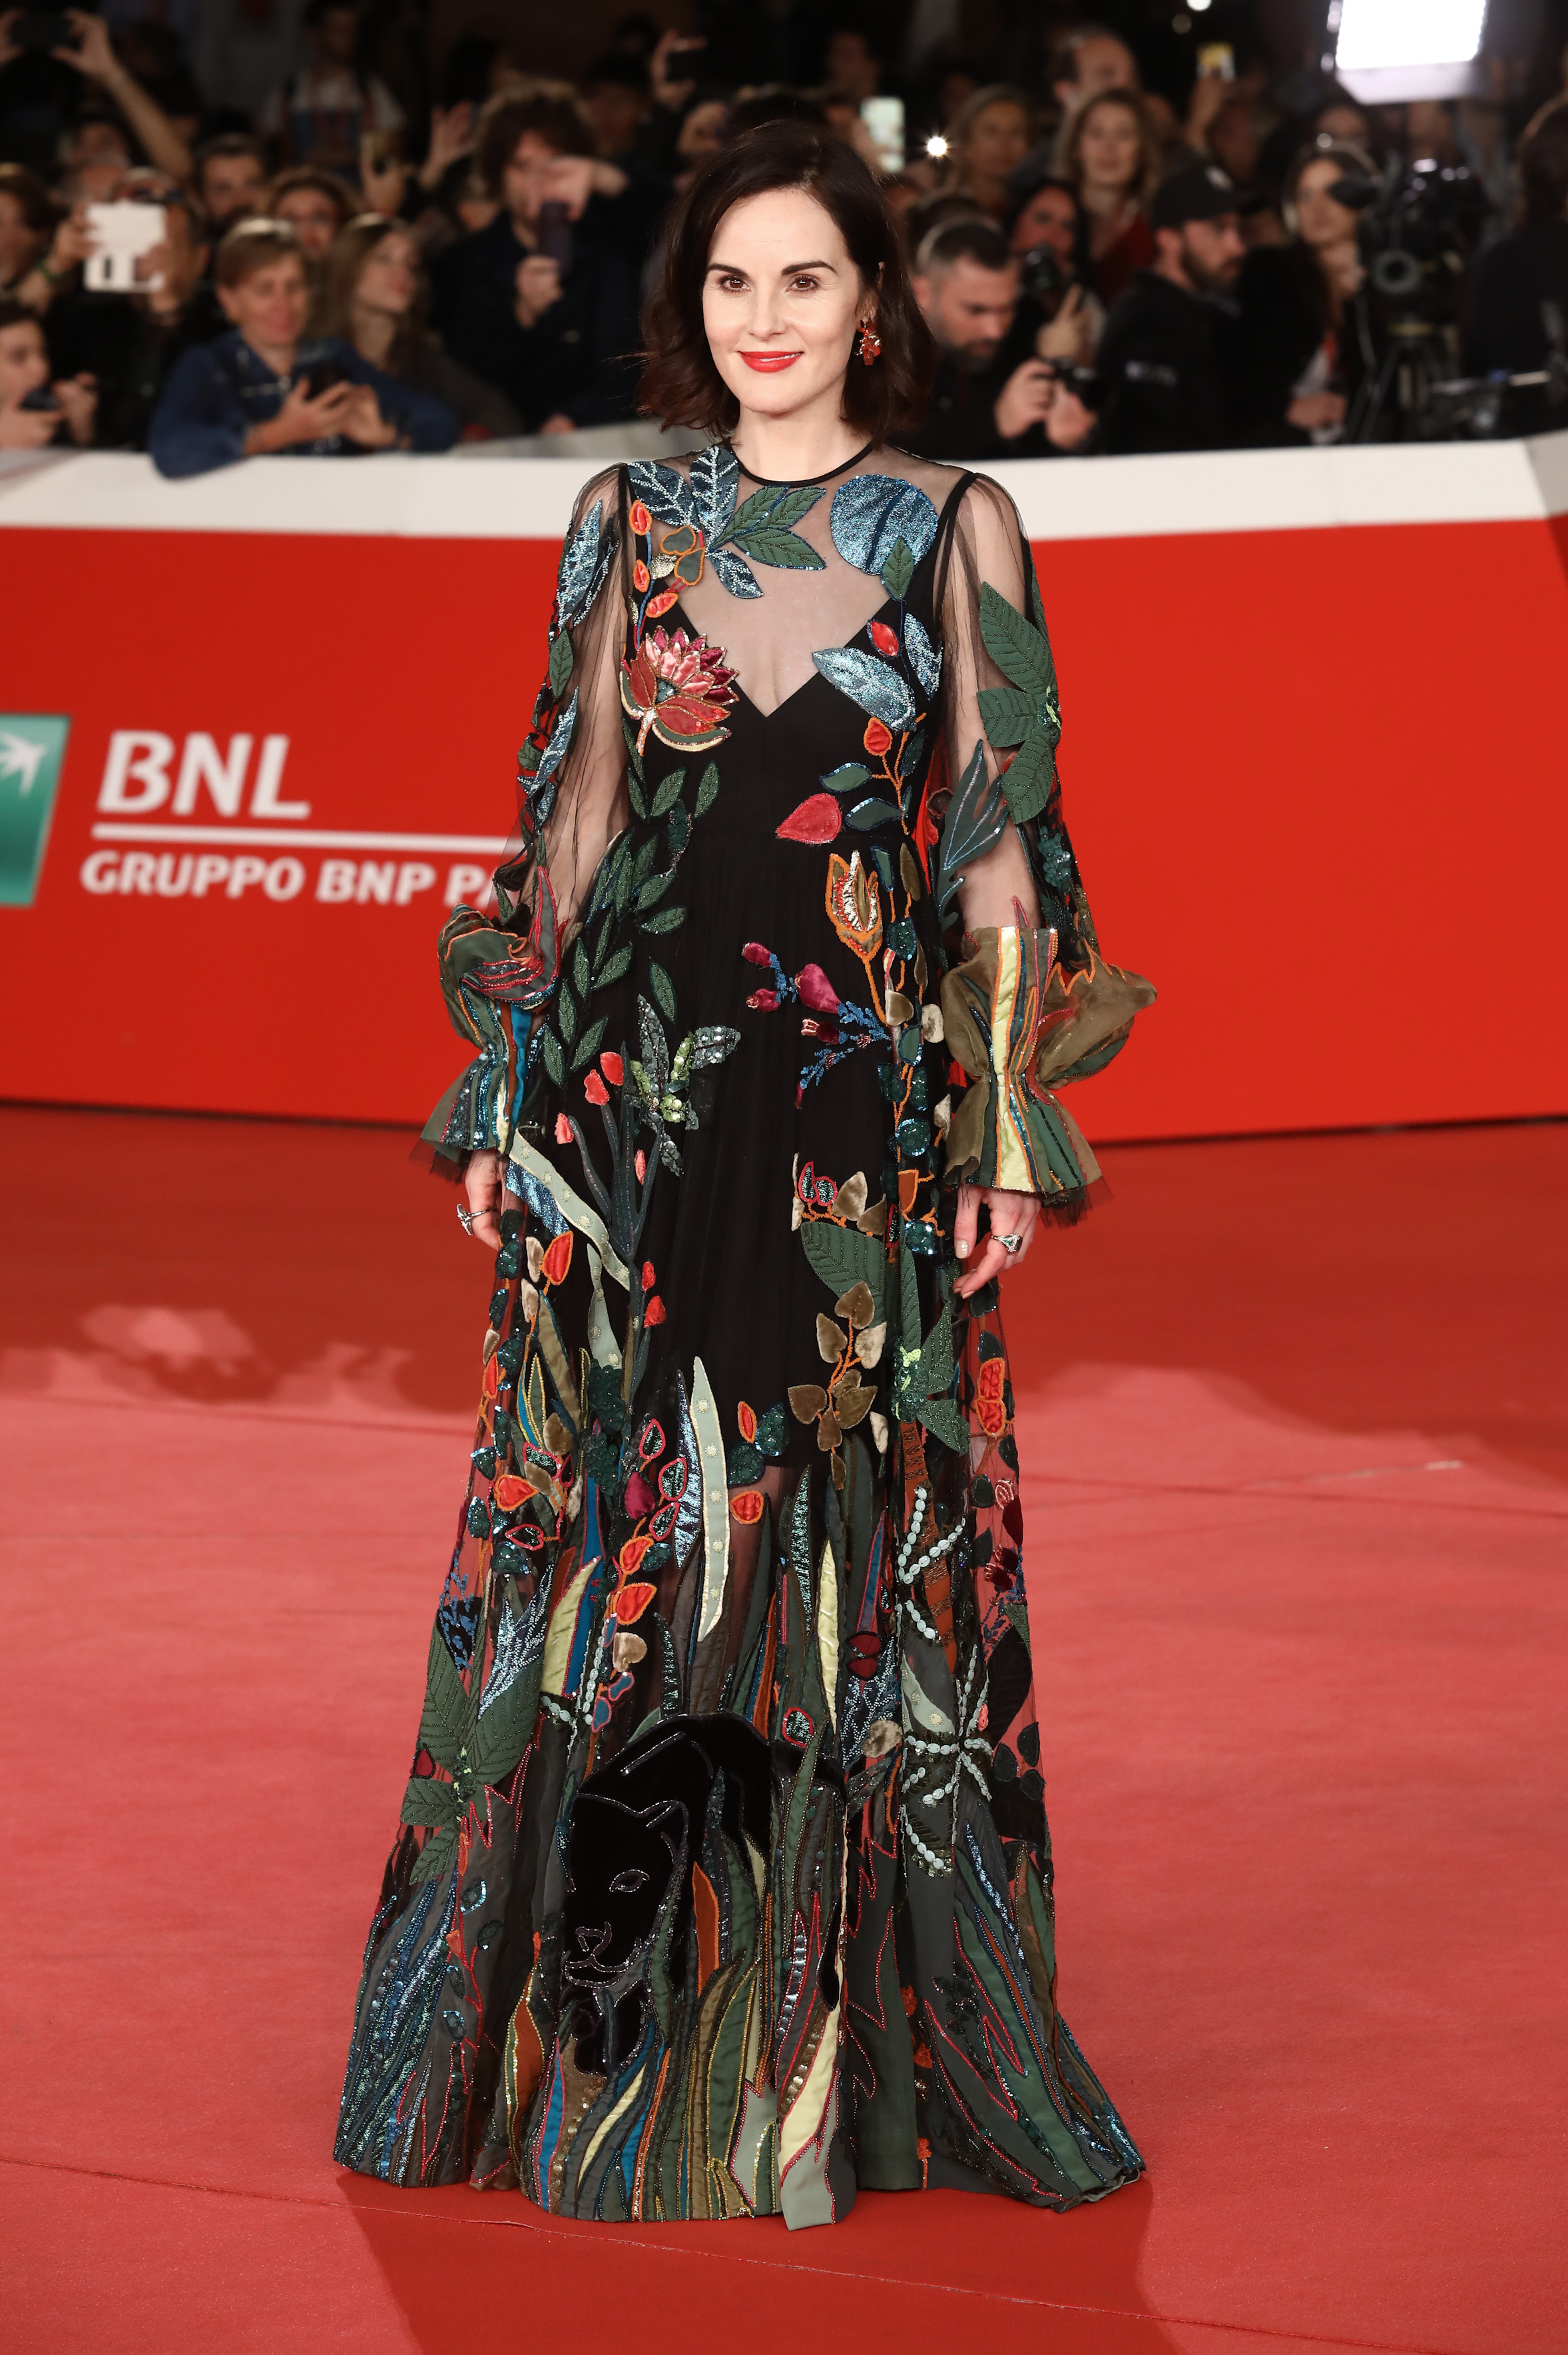 Michelle Dockery Wearing Valentino About Her